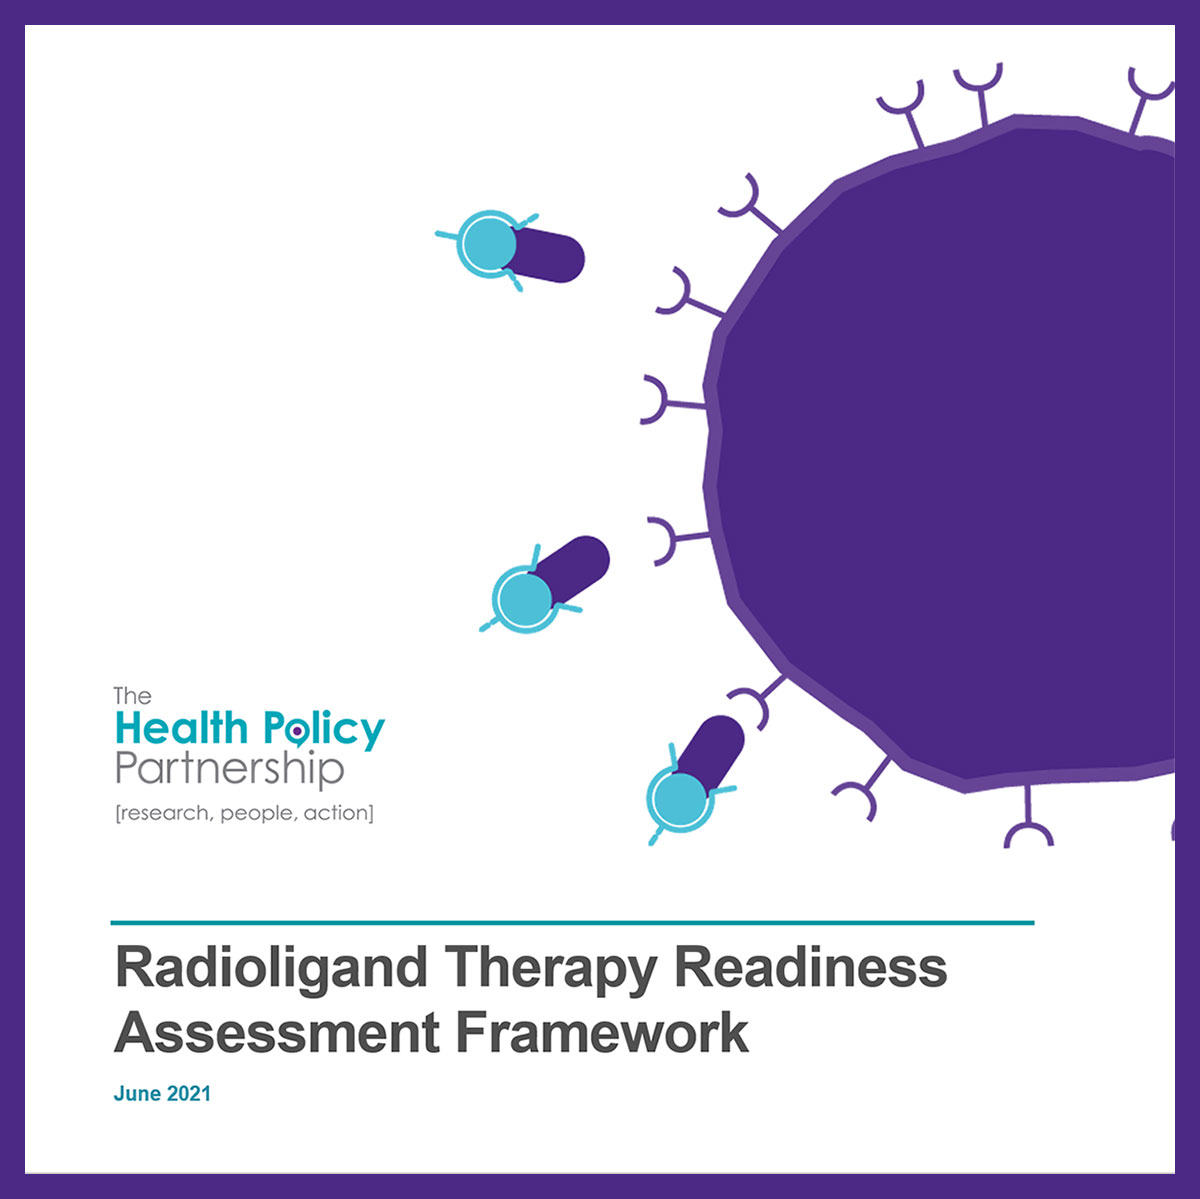 Radioligand Therapy Readiness Assessment Framework launched at event with esteemed speakers